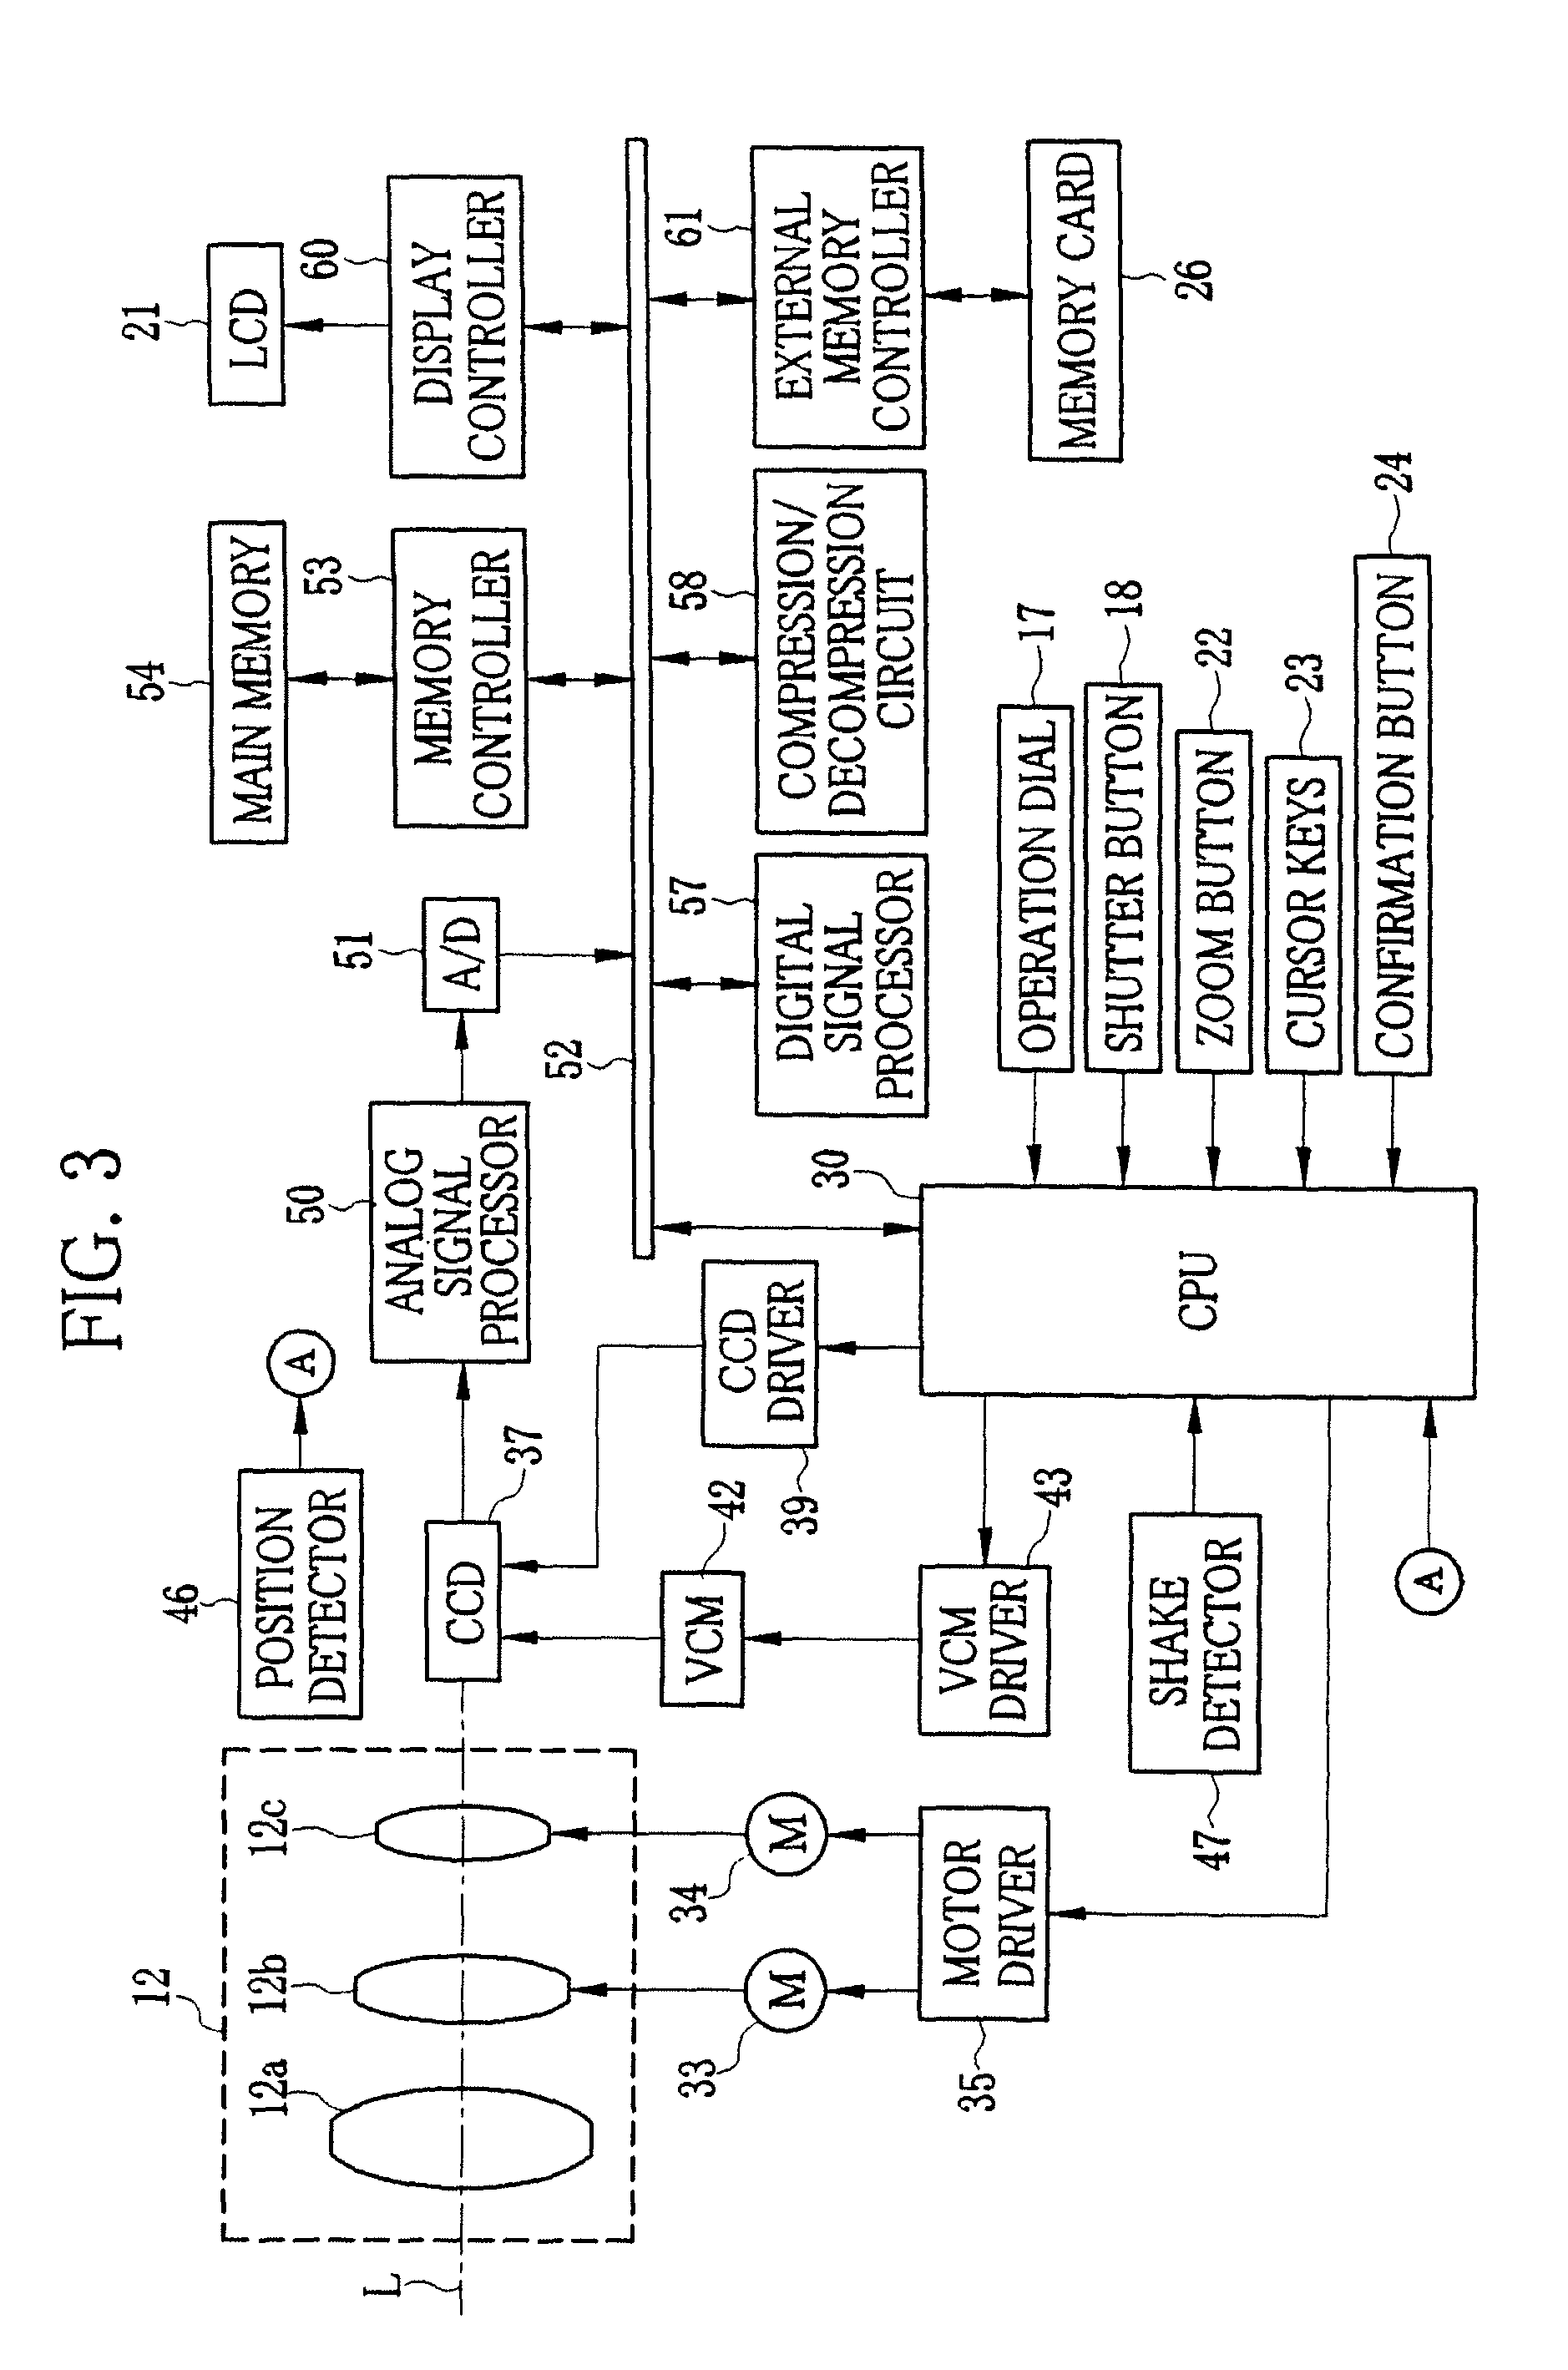 Image stabilizer for optical instrument